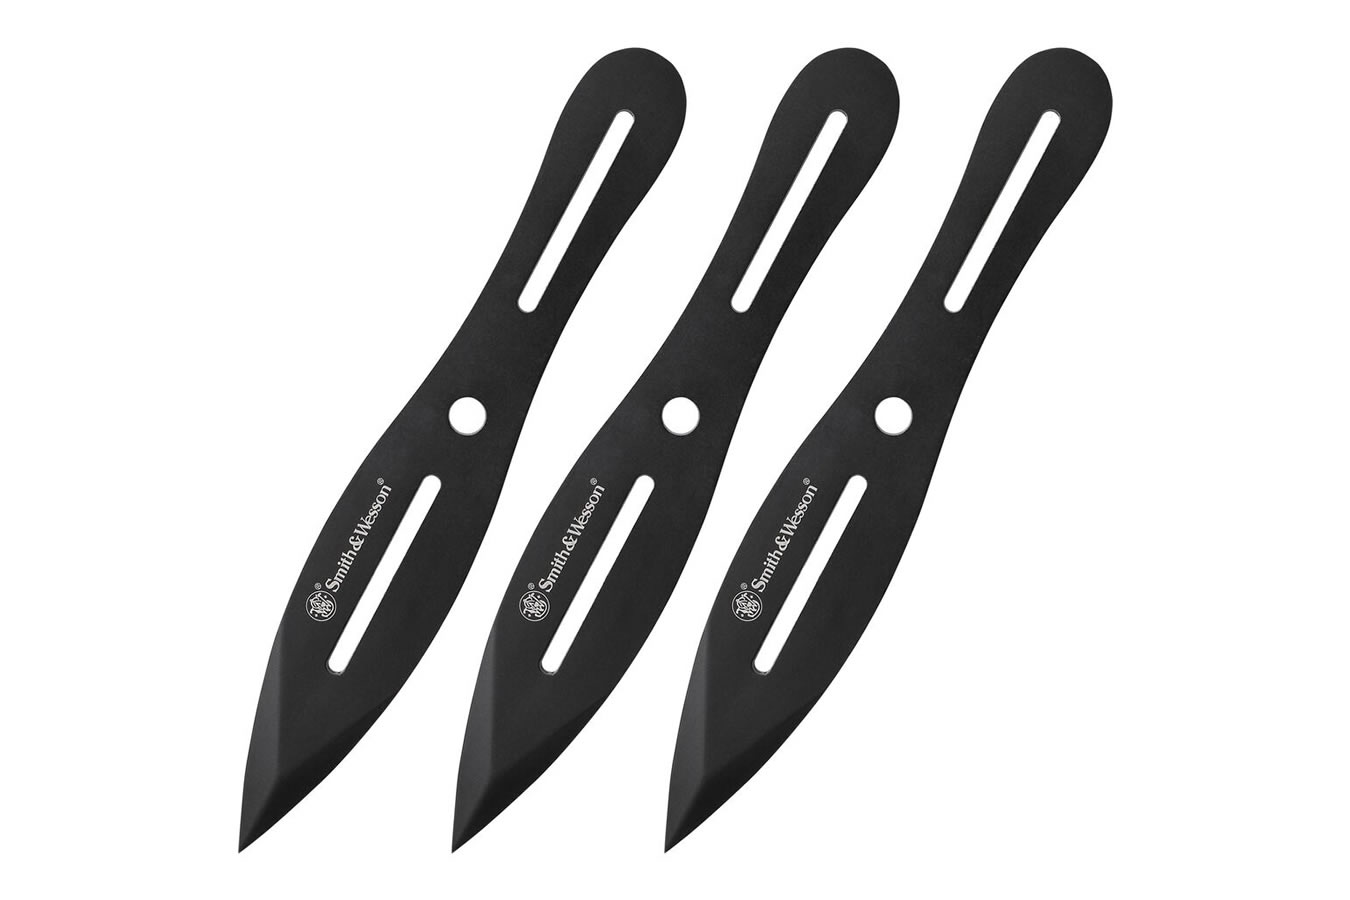 BTI LLC 3 PC 8 IN BLACK COATED THROWING KNIVES